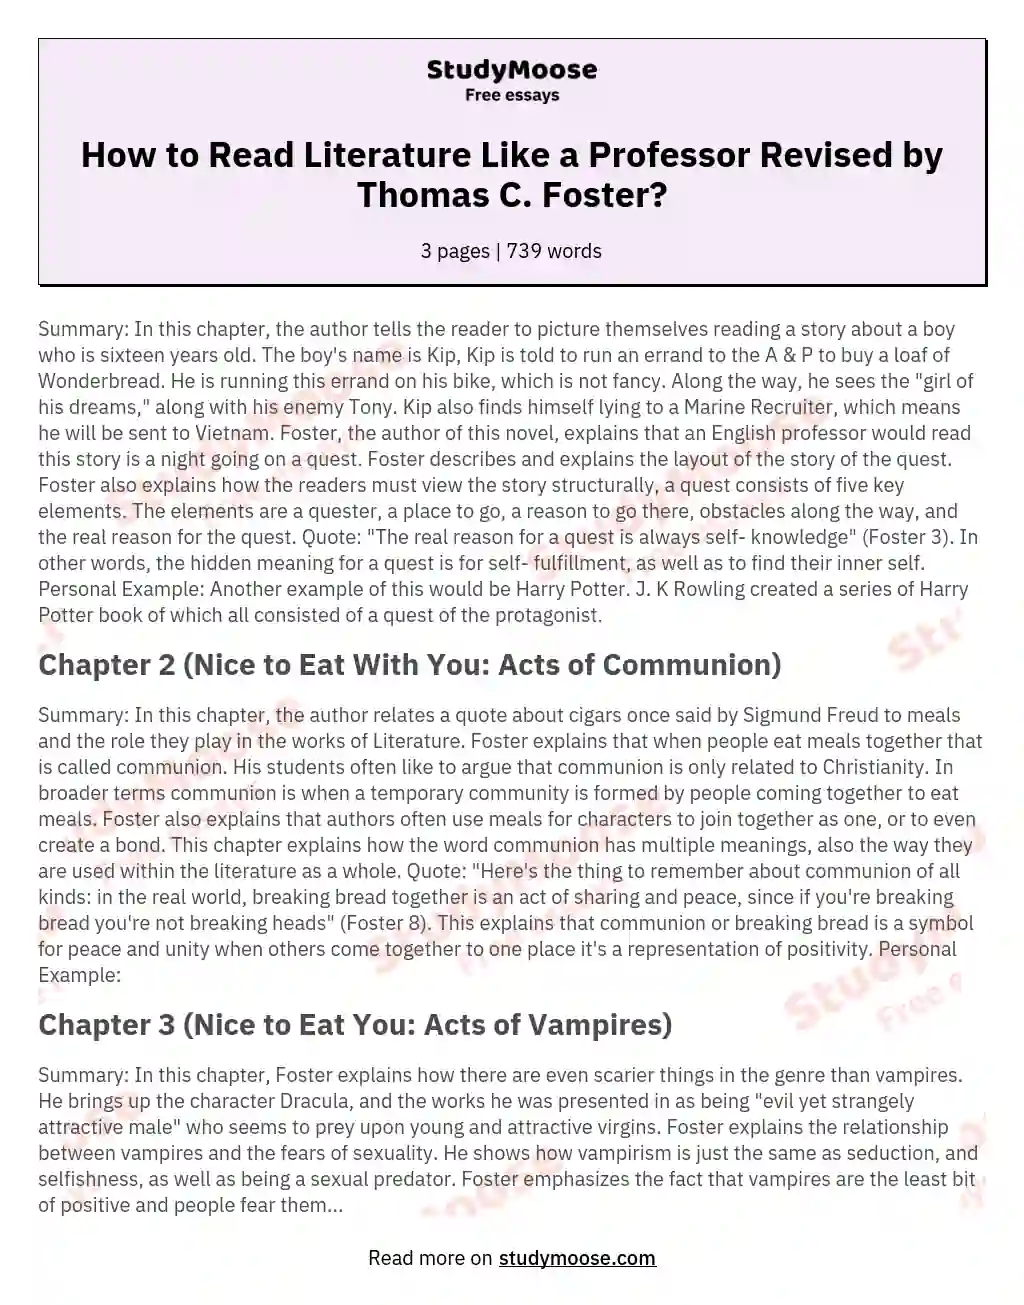 How to Read Literature Like a Professor Revised by Thomas C. Foster? essay